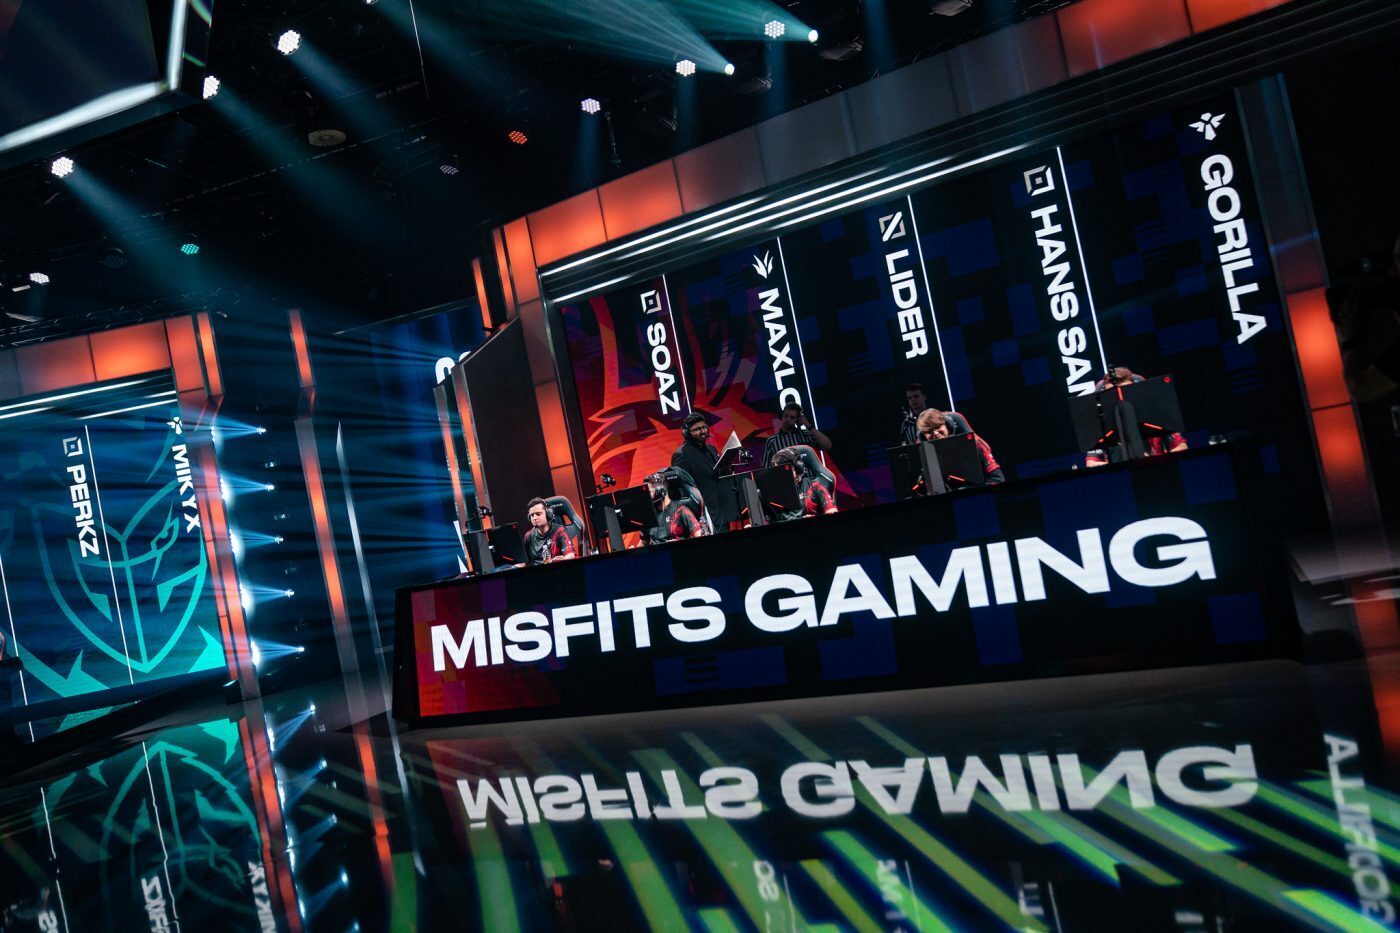 Misfits Gaming's entire LEC roster has been swapped for their Academy roster. (Image courtesy of Riot Games)